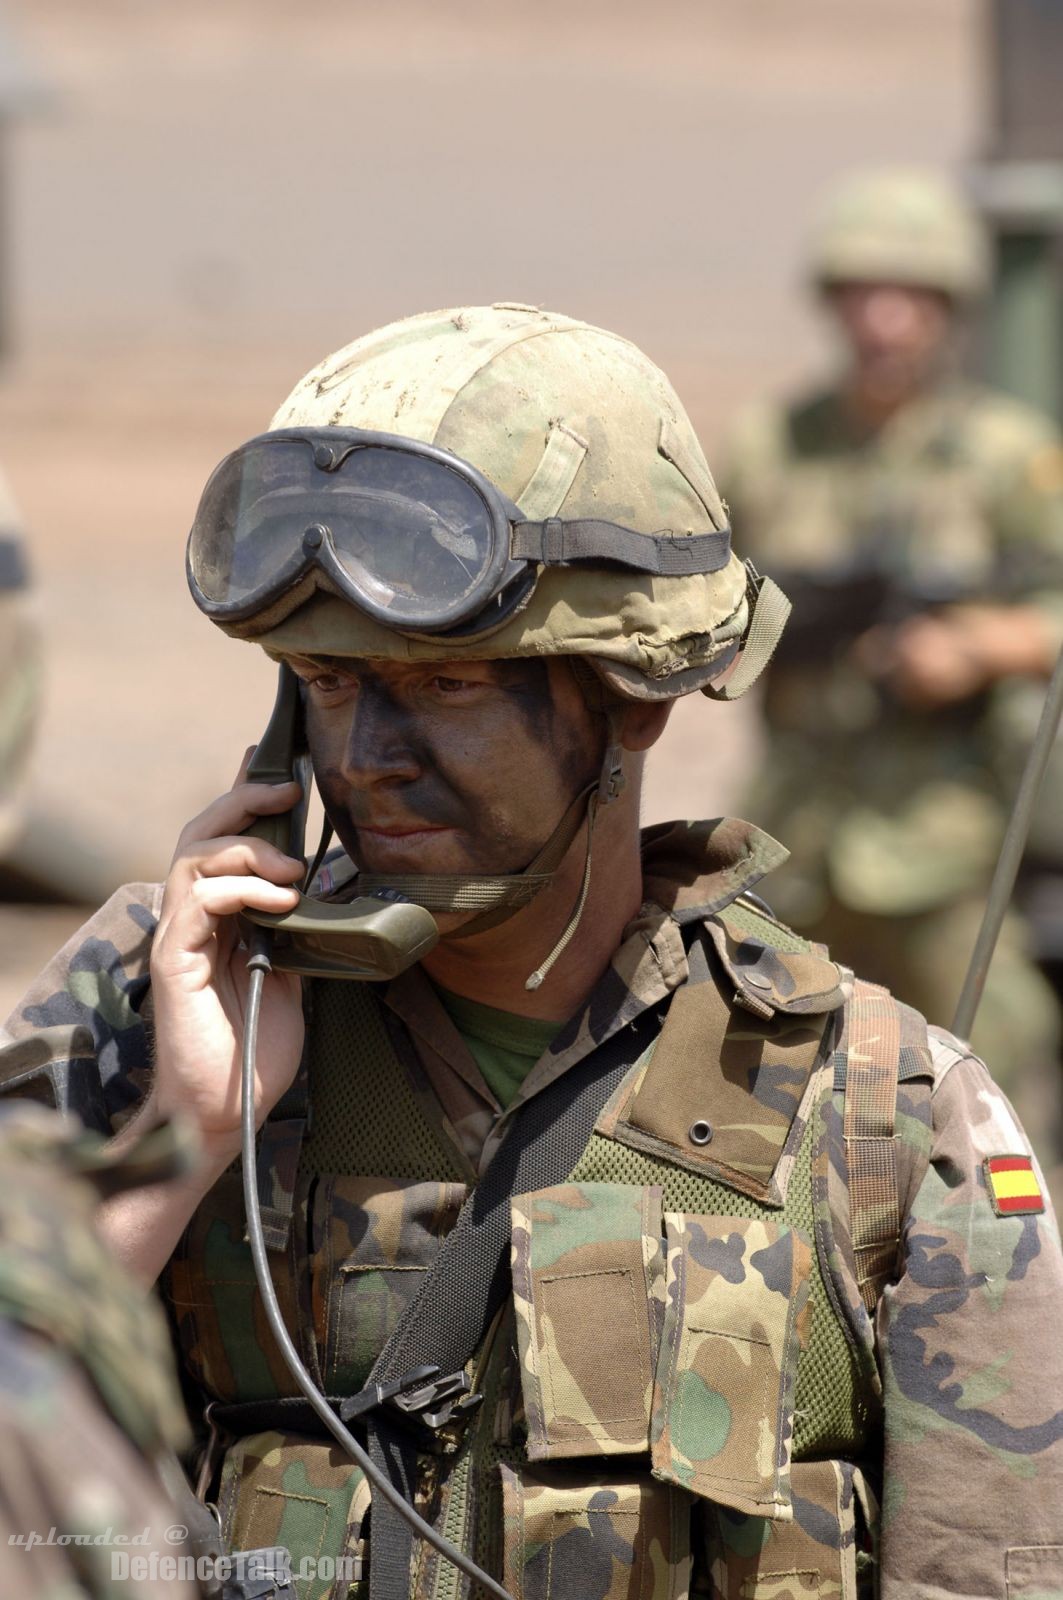 Spanish troops - Steadfast Jaguar Exercise by NATO Response Force (NRF)